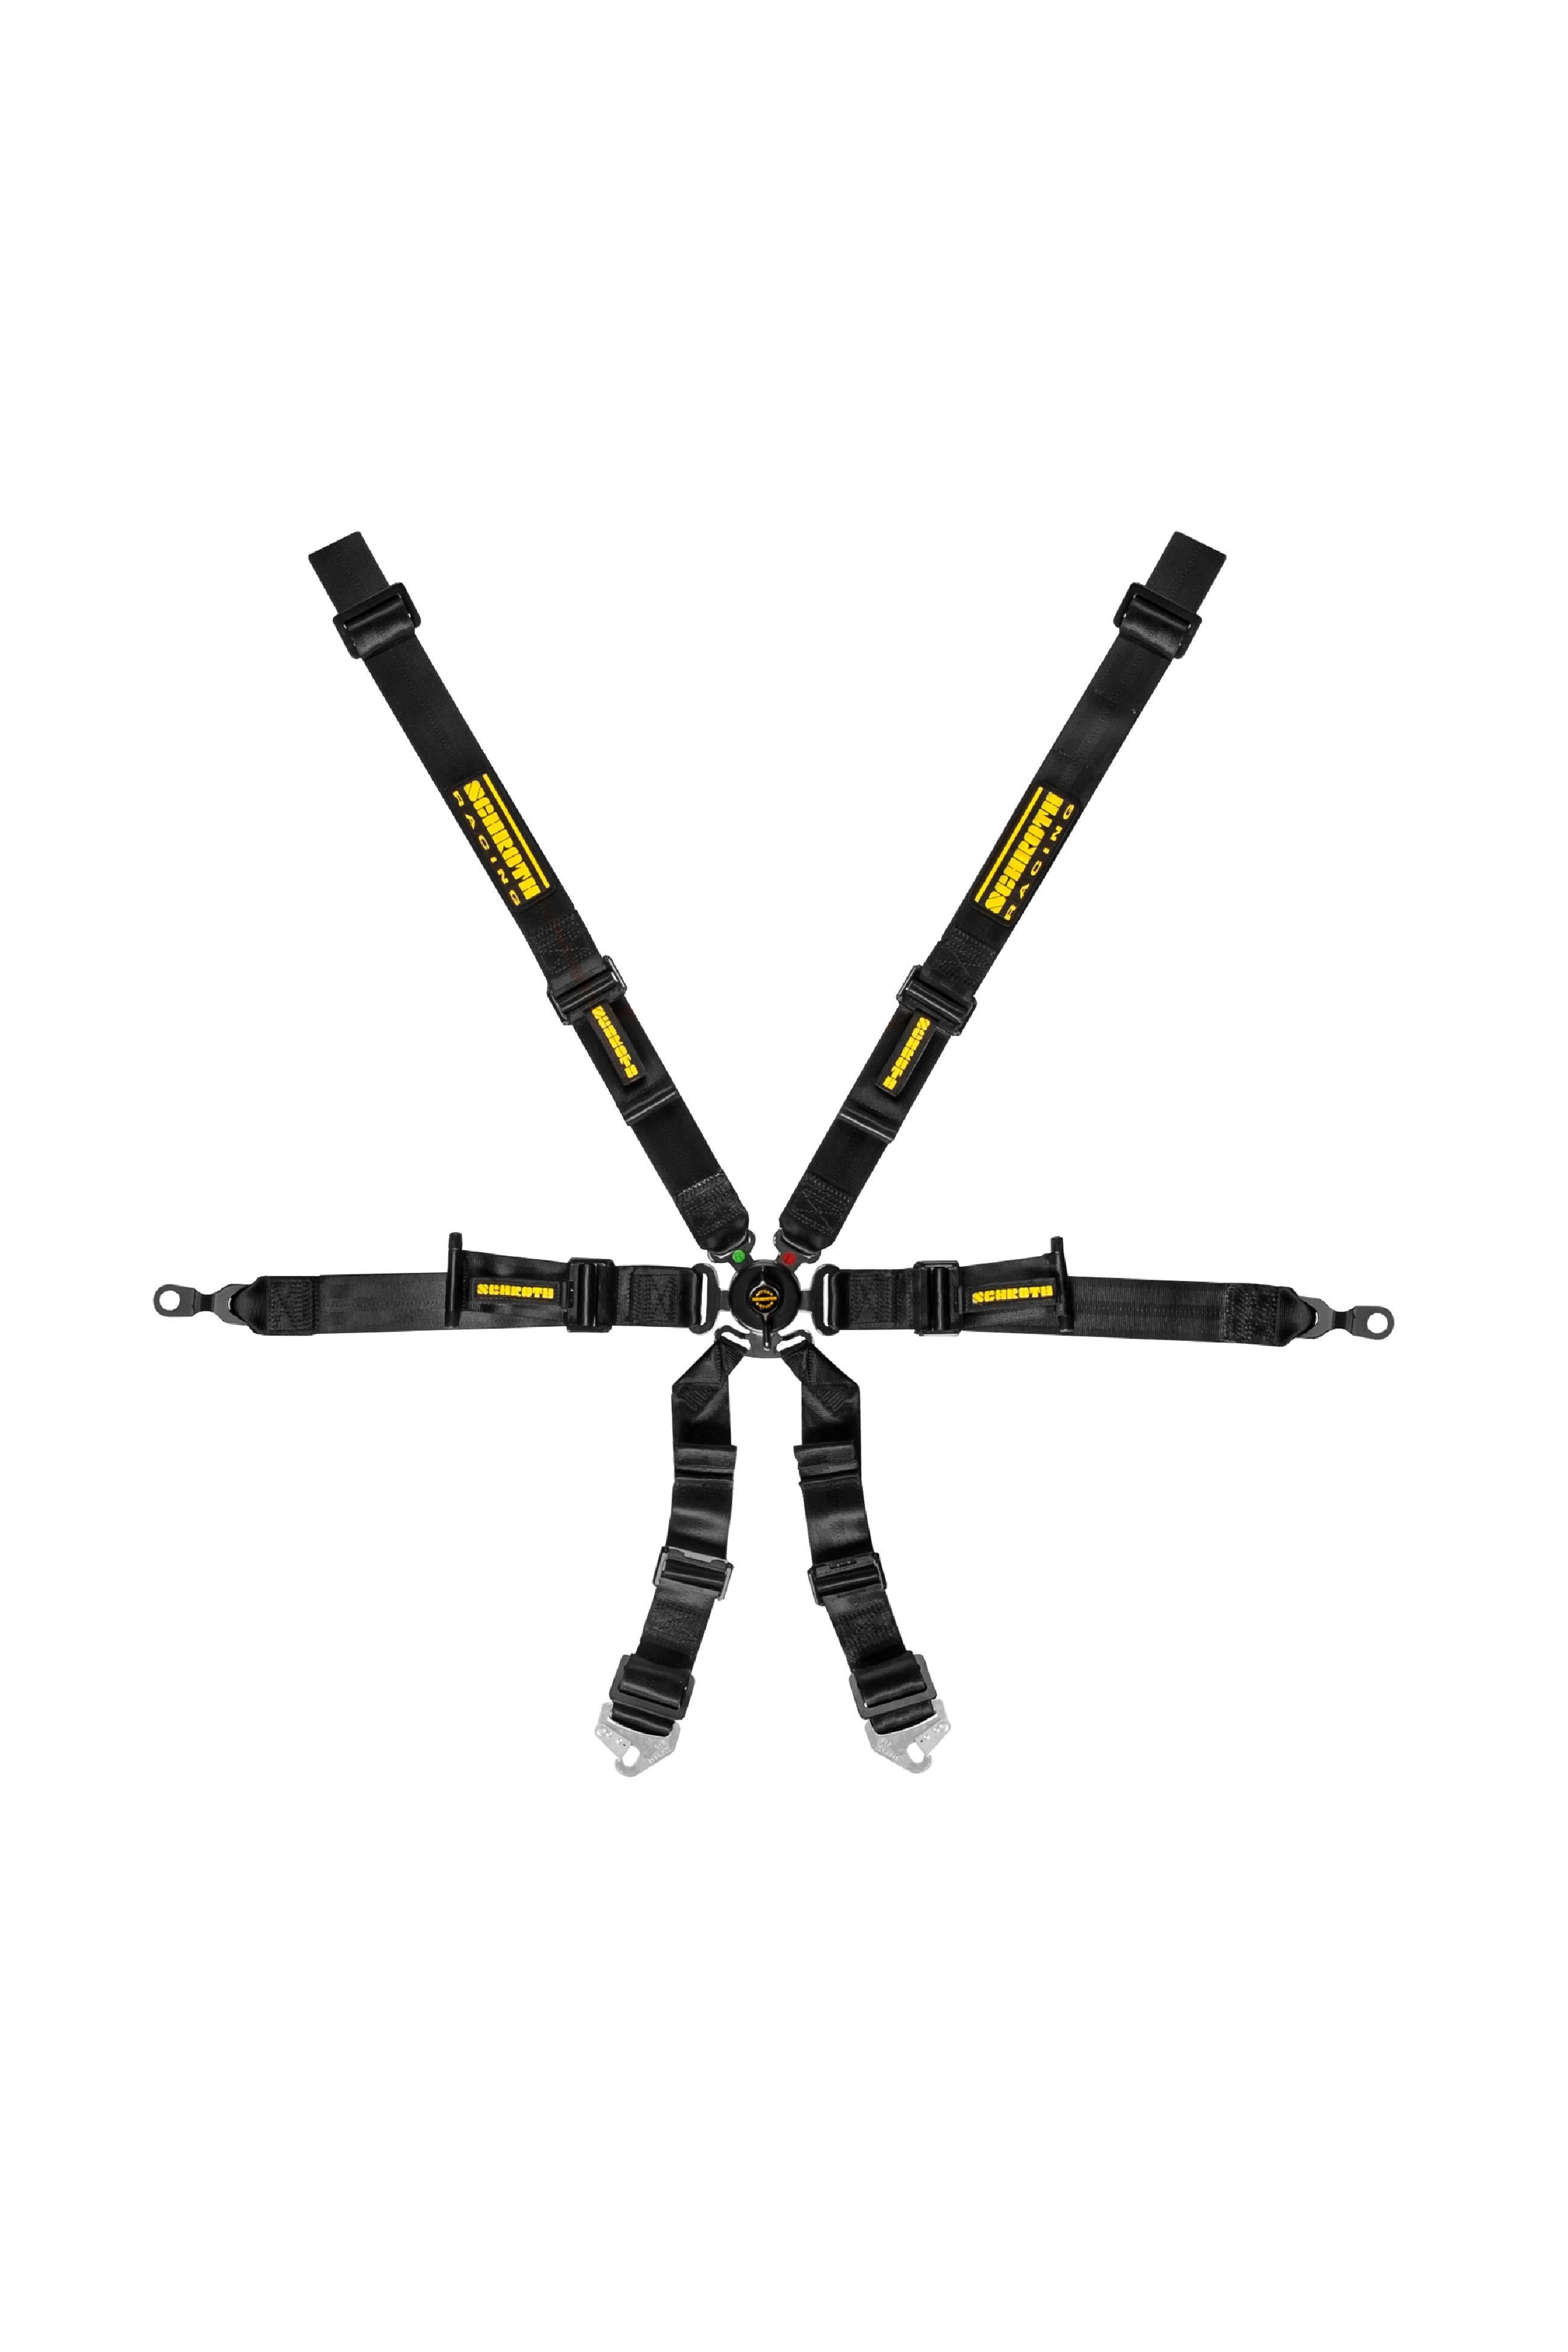 Schroth Racing GT3 P2x2-6 PD Lap-Adj Sb BLK-x27 Safety Restraints Seat Belts and Harnesses main image